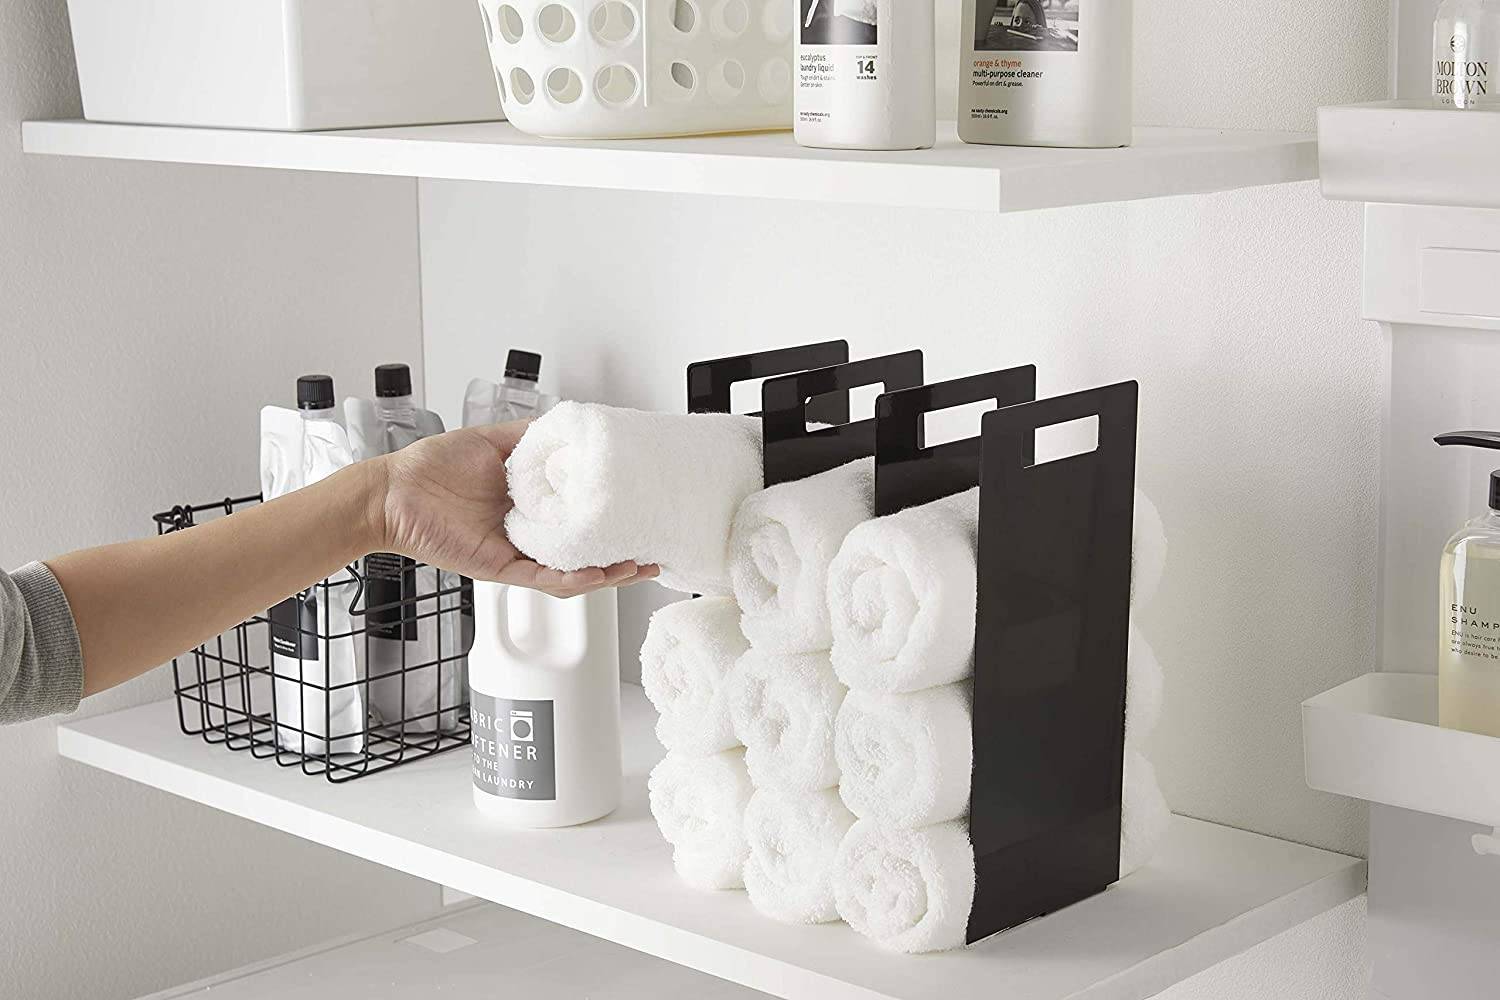 interlocking towel organizer with white towels on laundry room shelf next to shampoos and soap bottles